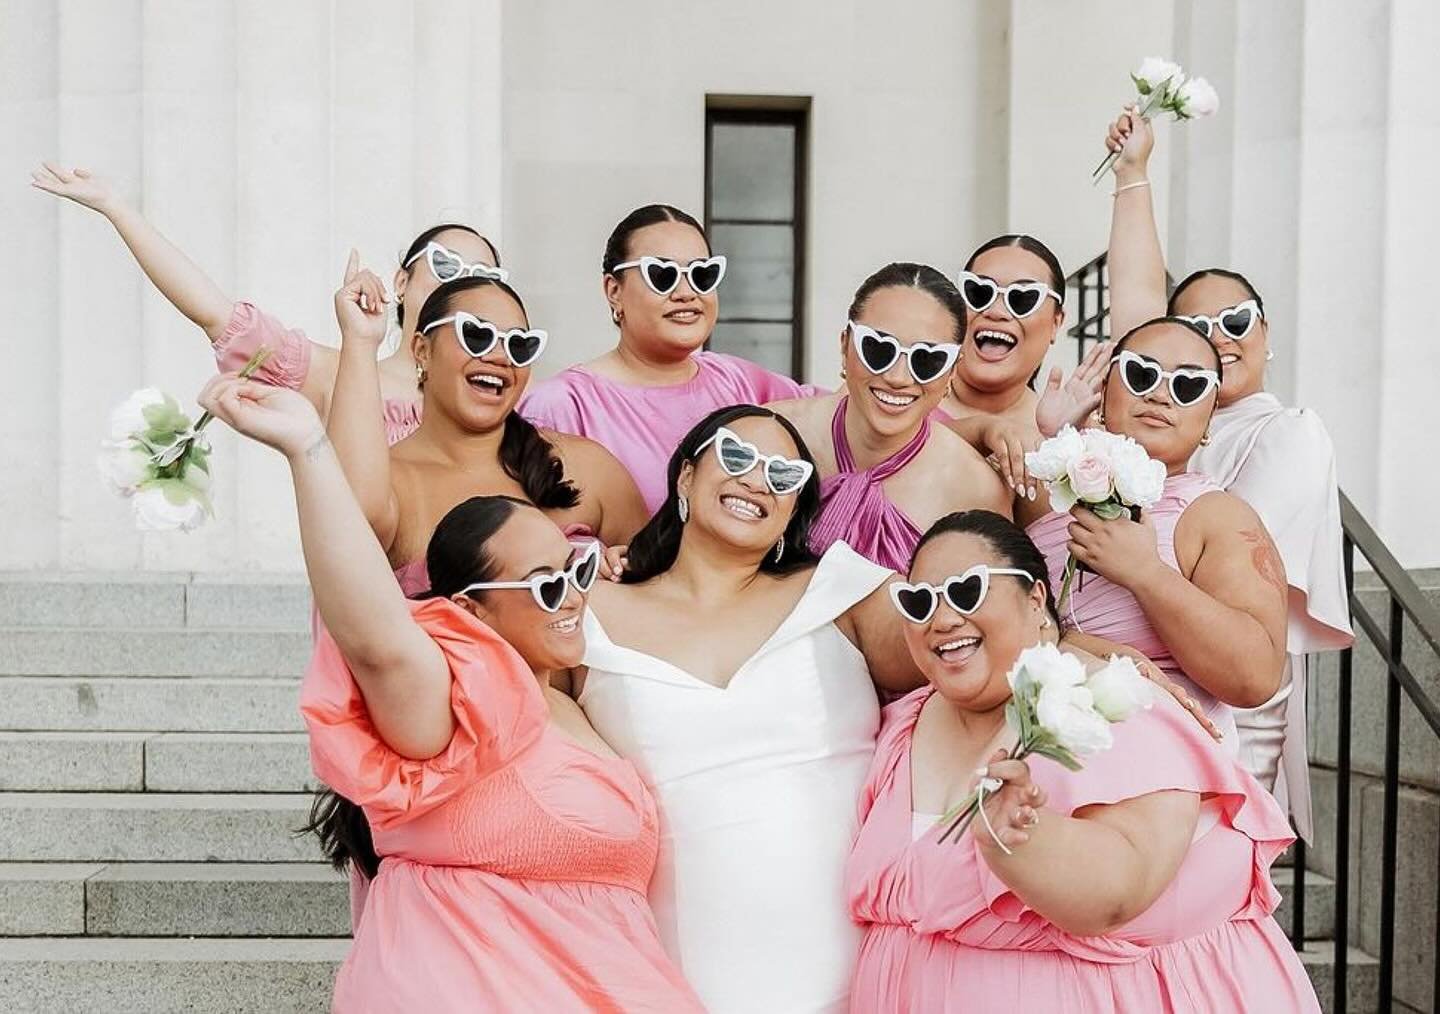 LOVE // Bride Kirsty with her gorgeous gals in beautiful shades of pink 💗 captured by super-talented @supergibophotography 📸💕
#nzbrideandgroom 
Gown - Astra Bridal @astrabridal.auckland @astrabridal.northshore @astrabridal.hamilton @astrabridal.we